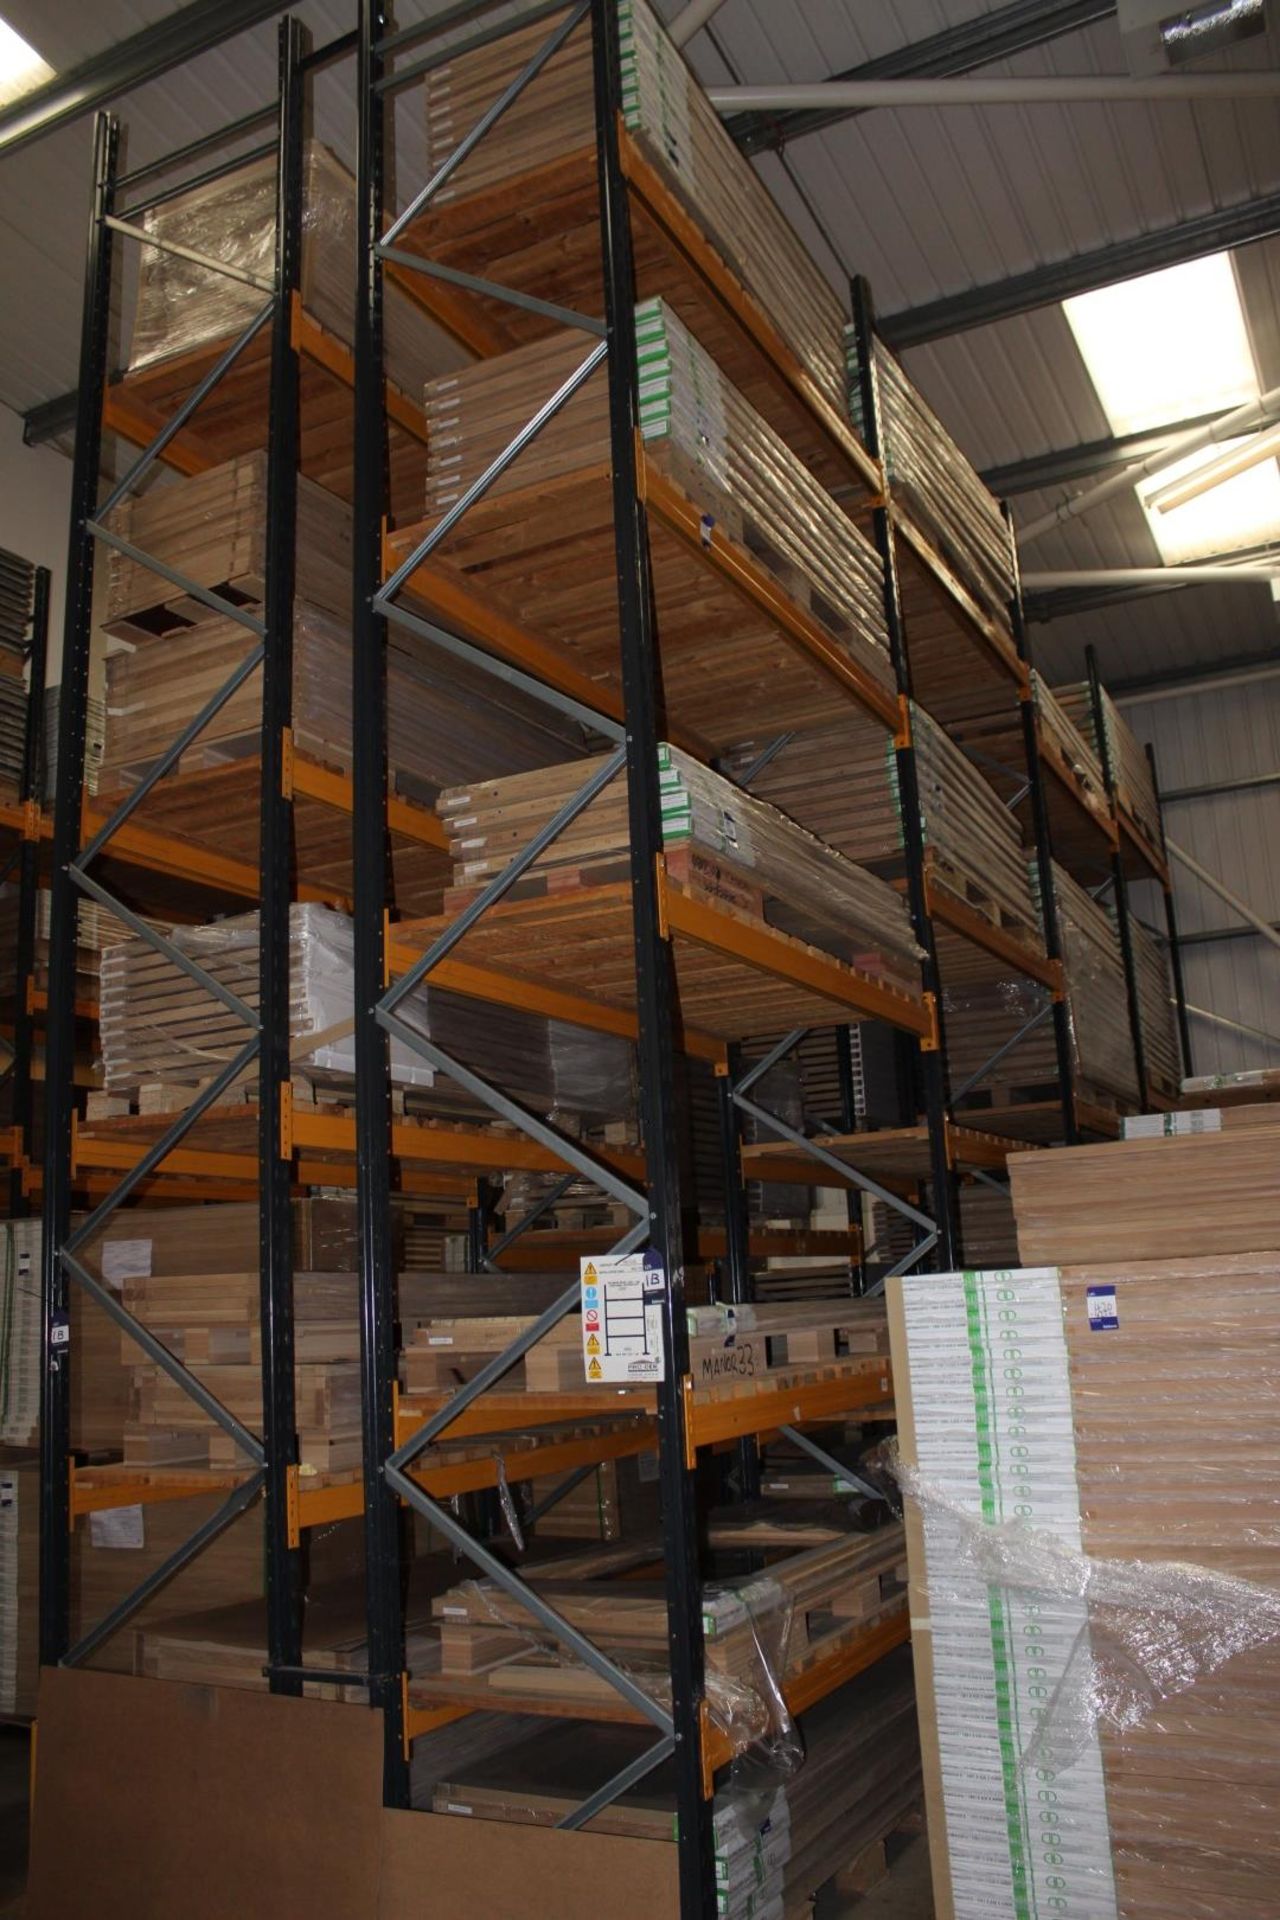 8 x Bays of Link 5M pallet racking, comprising: 10 x 6m uprights, 68 x 2.4m cross beams, wooden